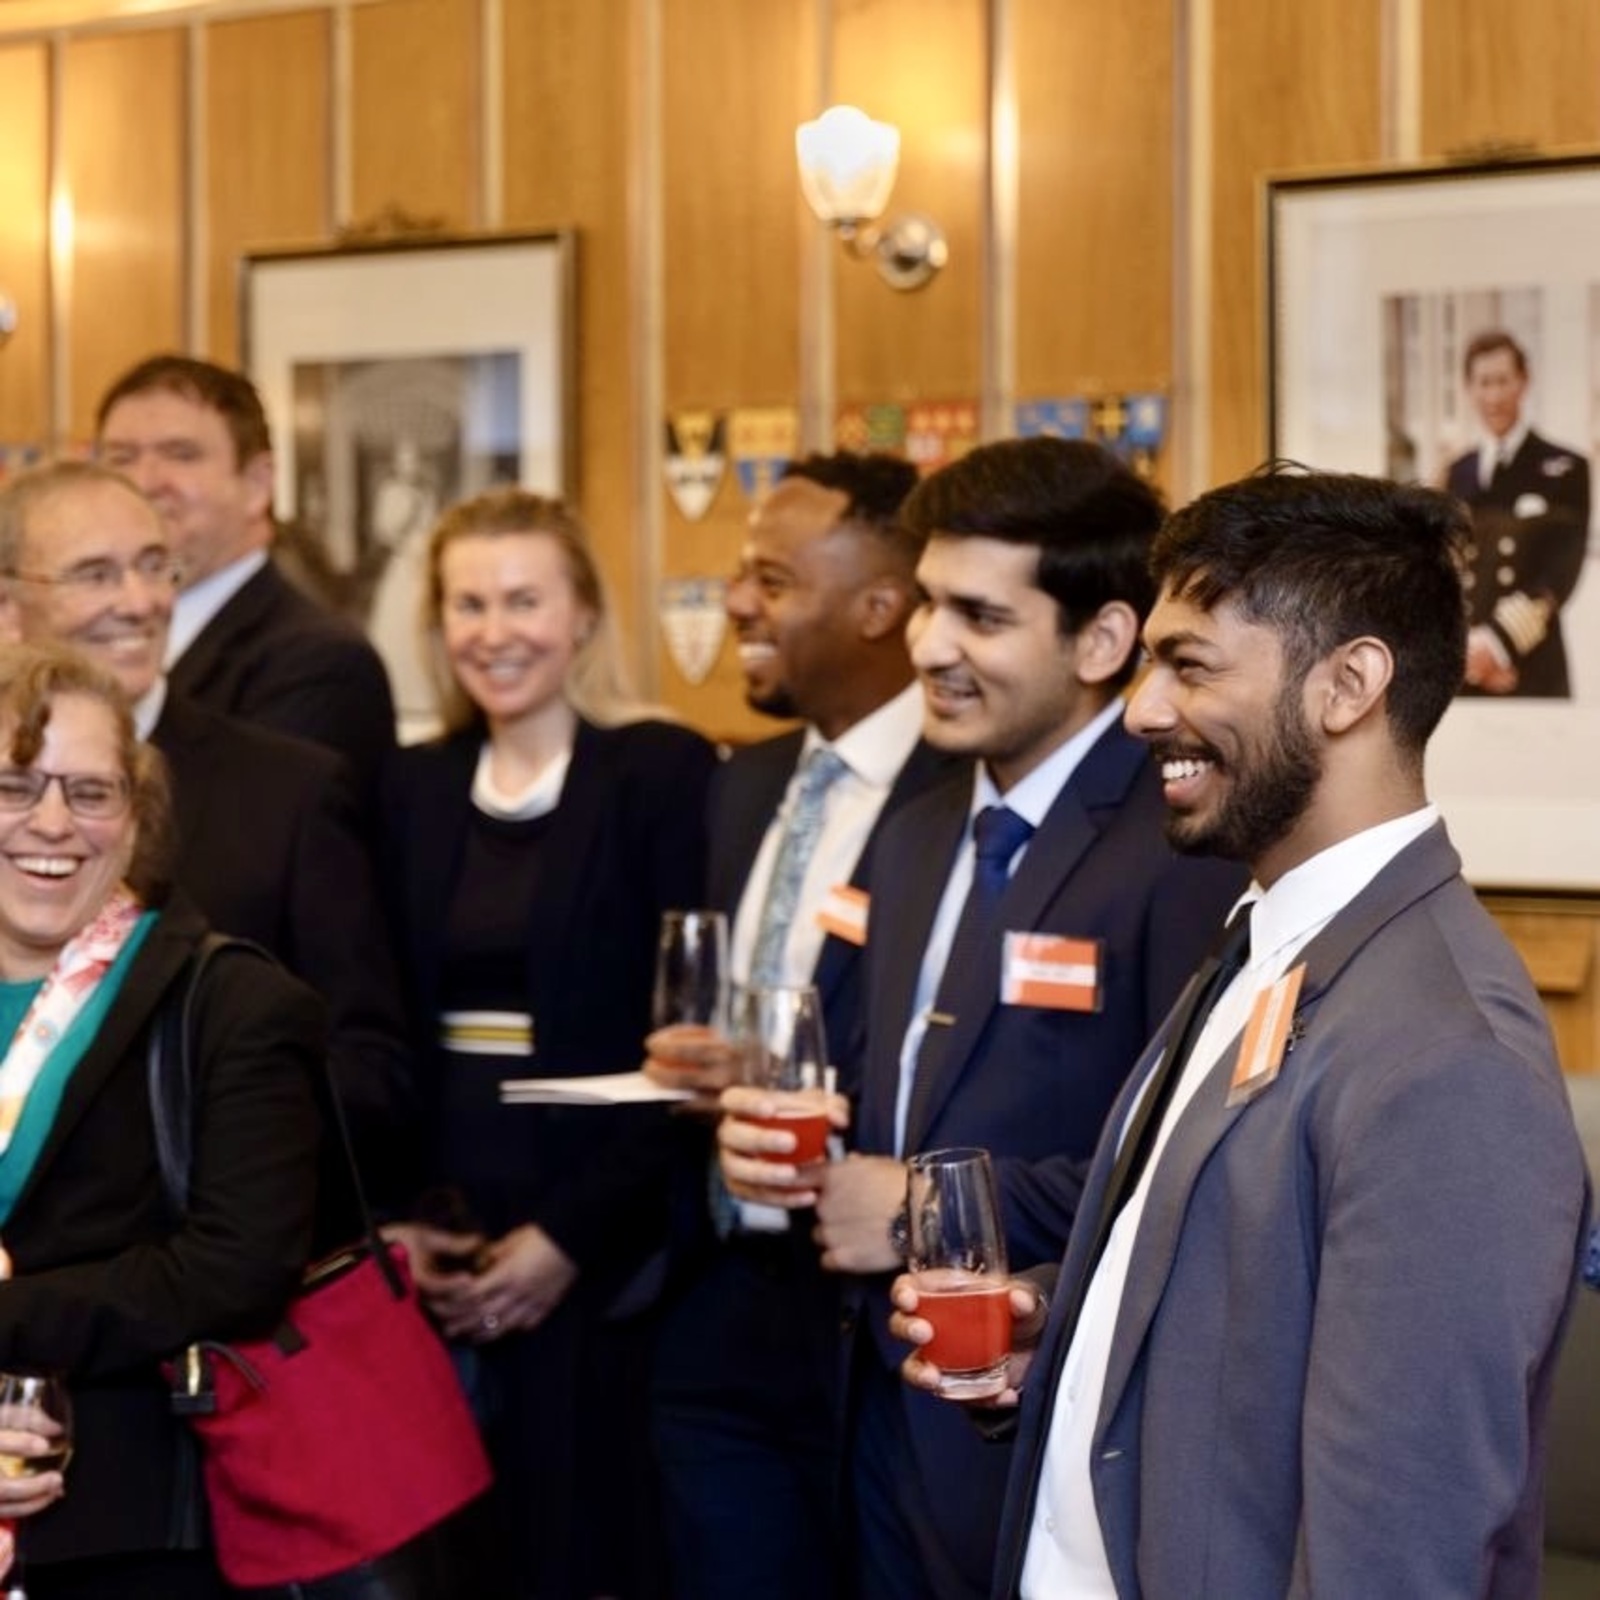 17 July 2023 - Great to host the first Mansion House Scholarship Scheme Reception in two years at the Old Bailey. 